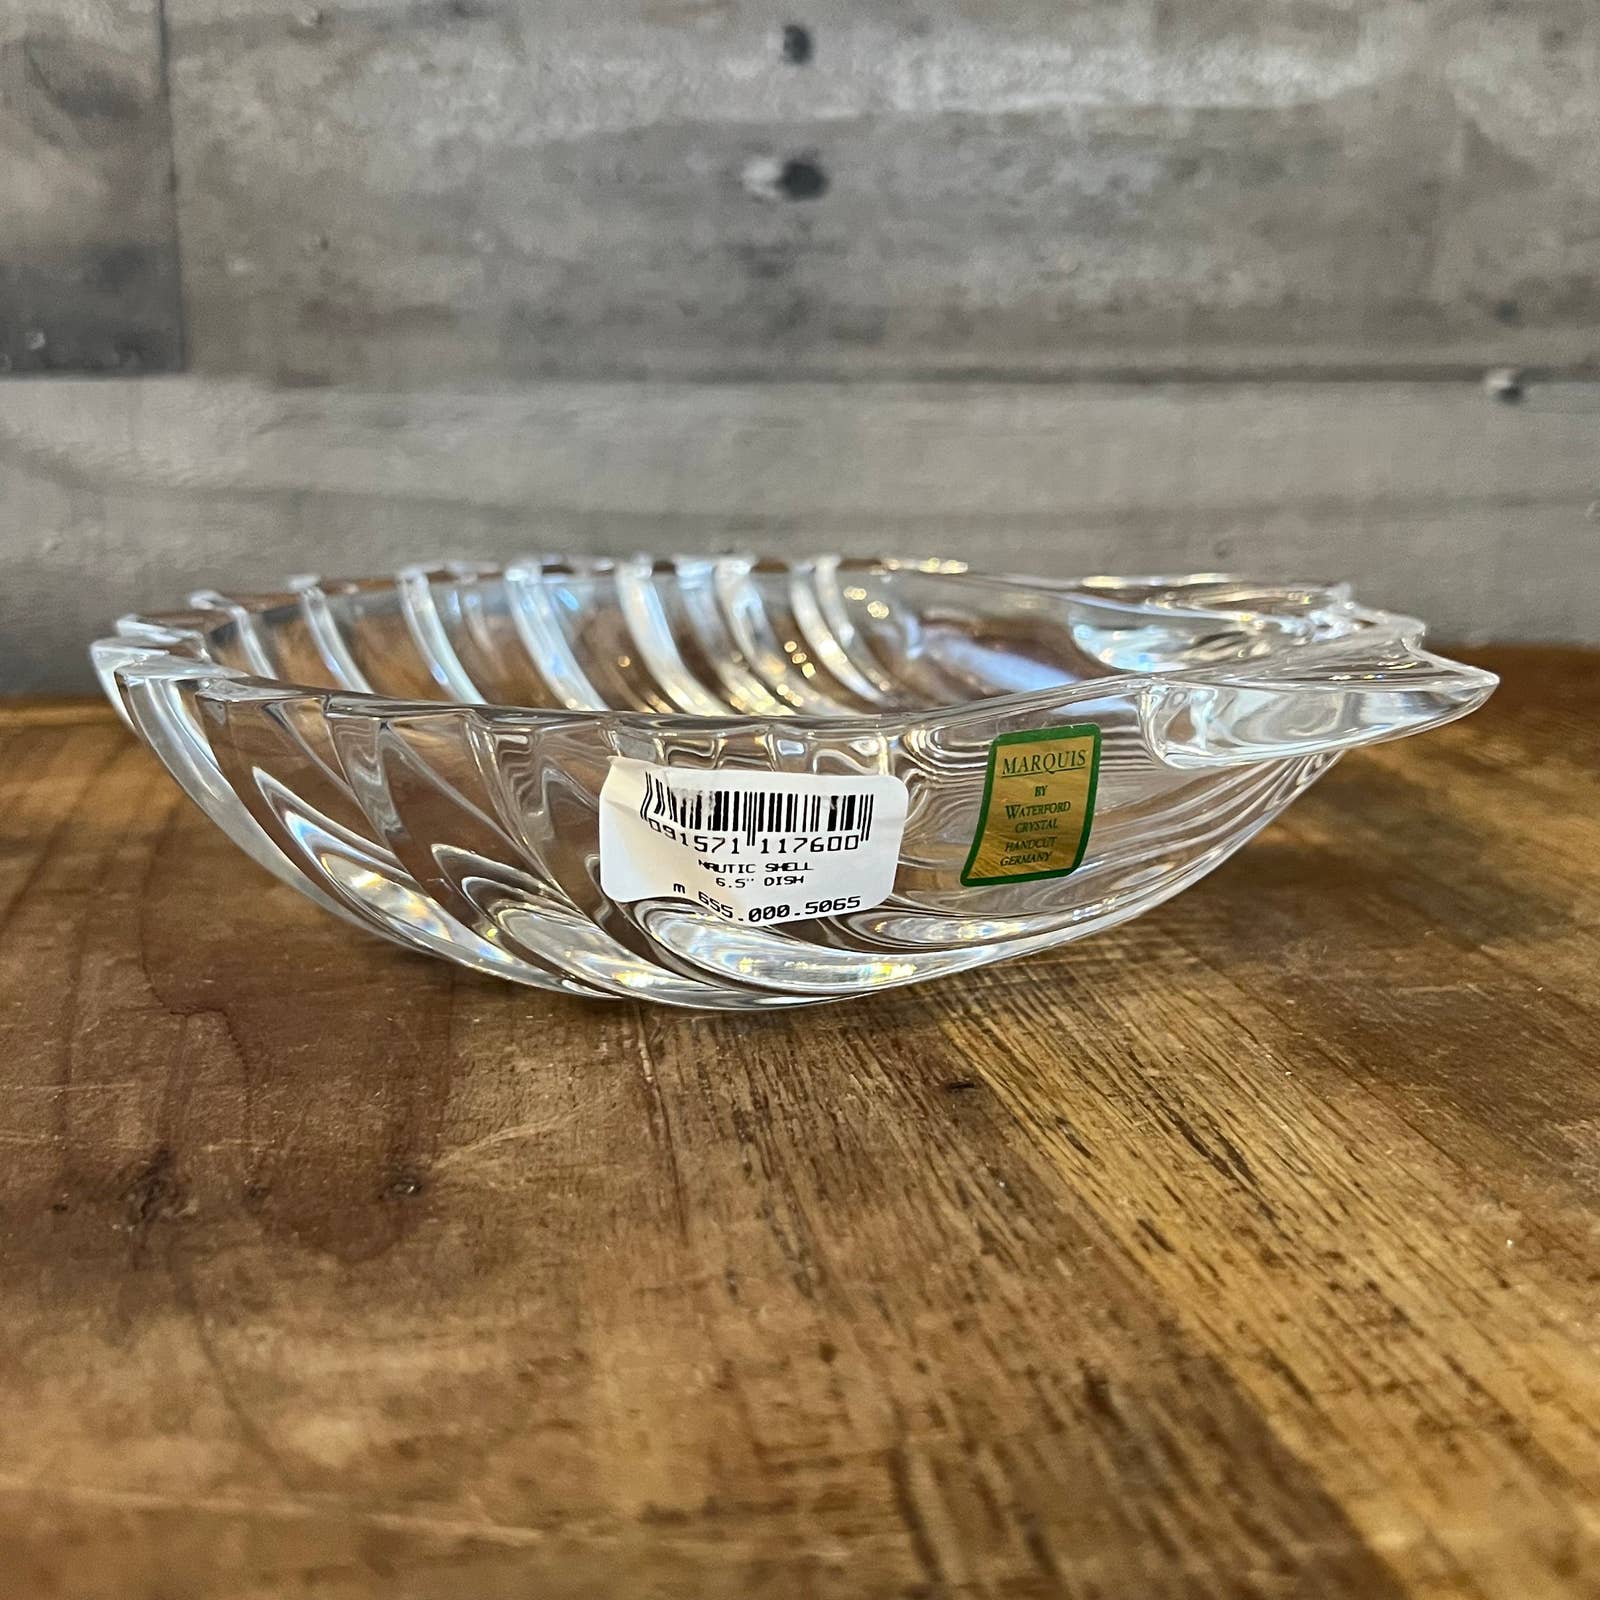 Waterford crystal nautical seashell bowl – THE ANTIQUE YARD